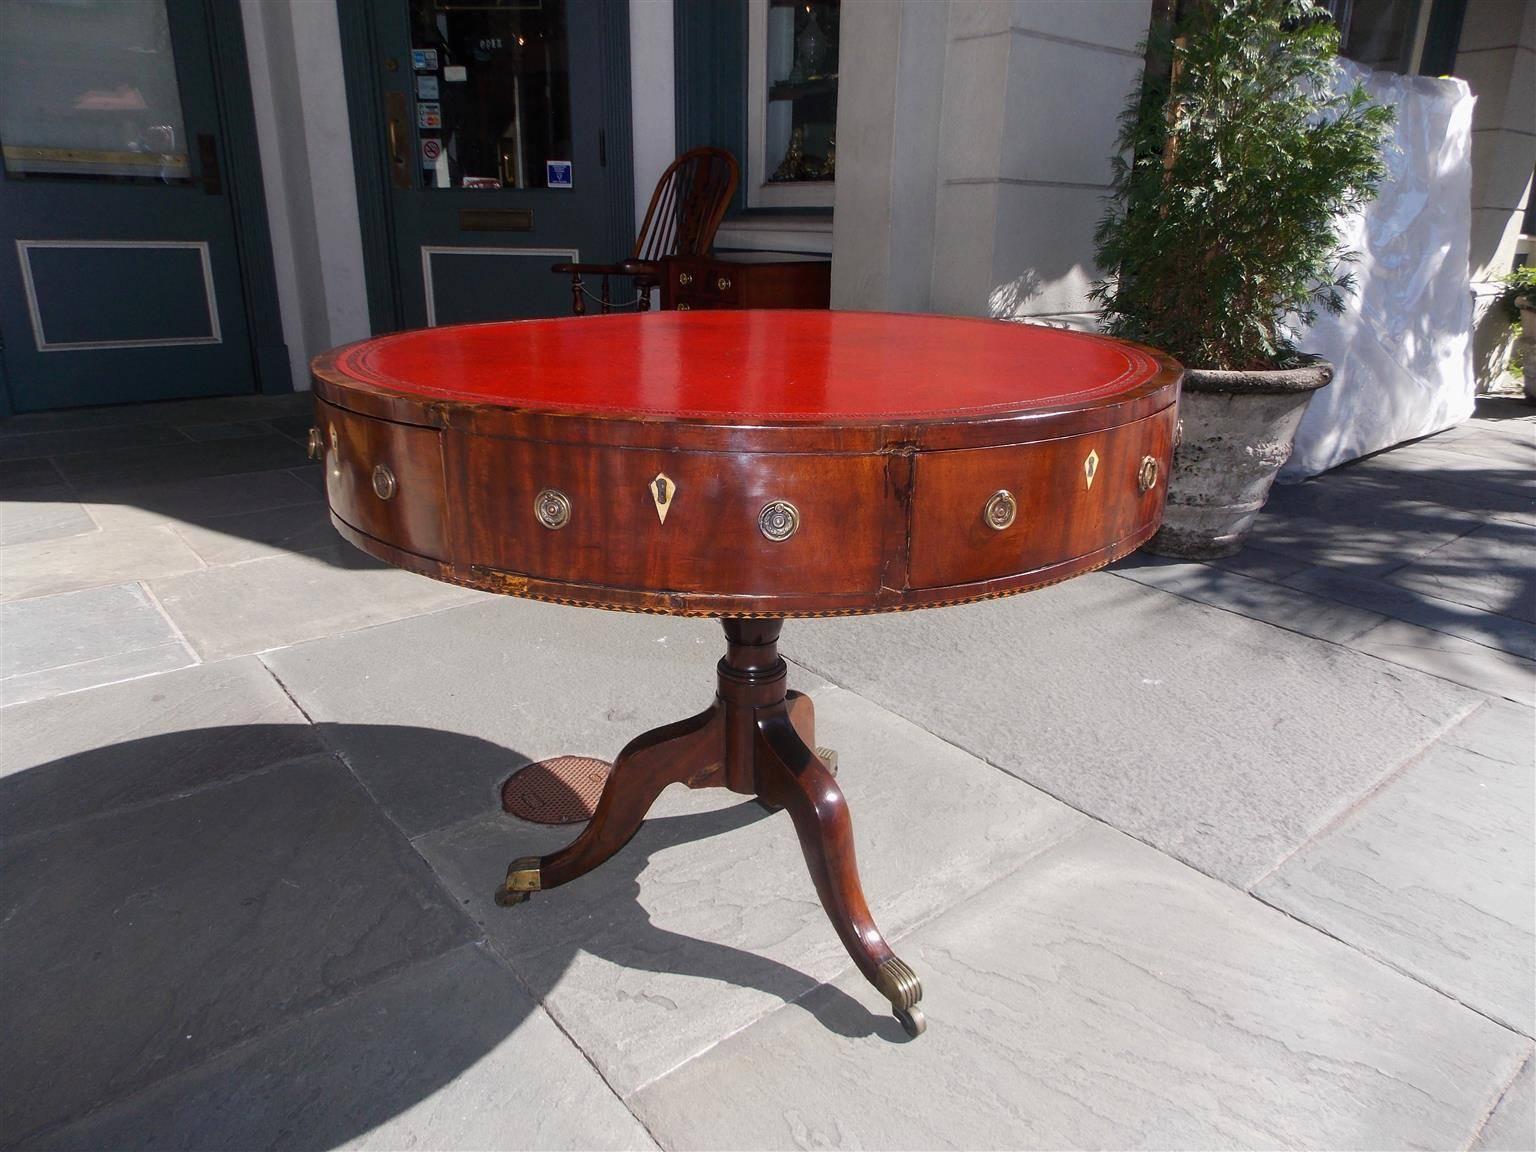 English mahogany four drawer red leather top rent table with circular swivel top, diamond bone escutcheons, checkered inlays, and terminating on a tripod base with original brass casters.  Late 18th Century